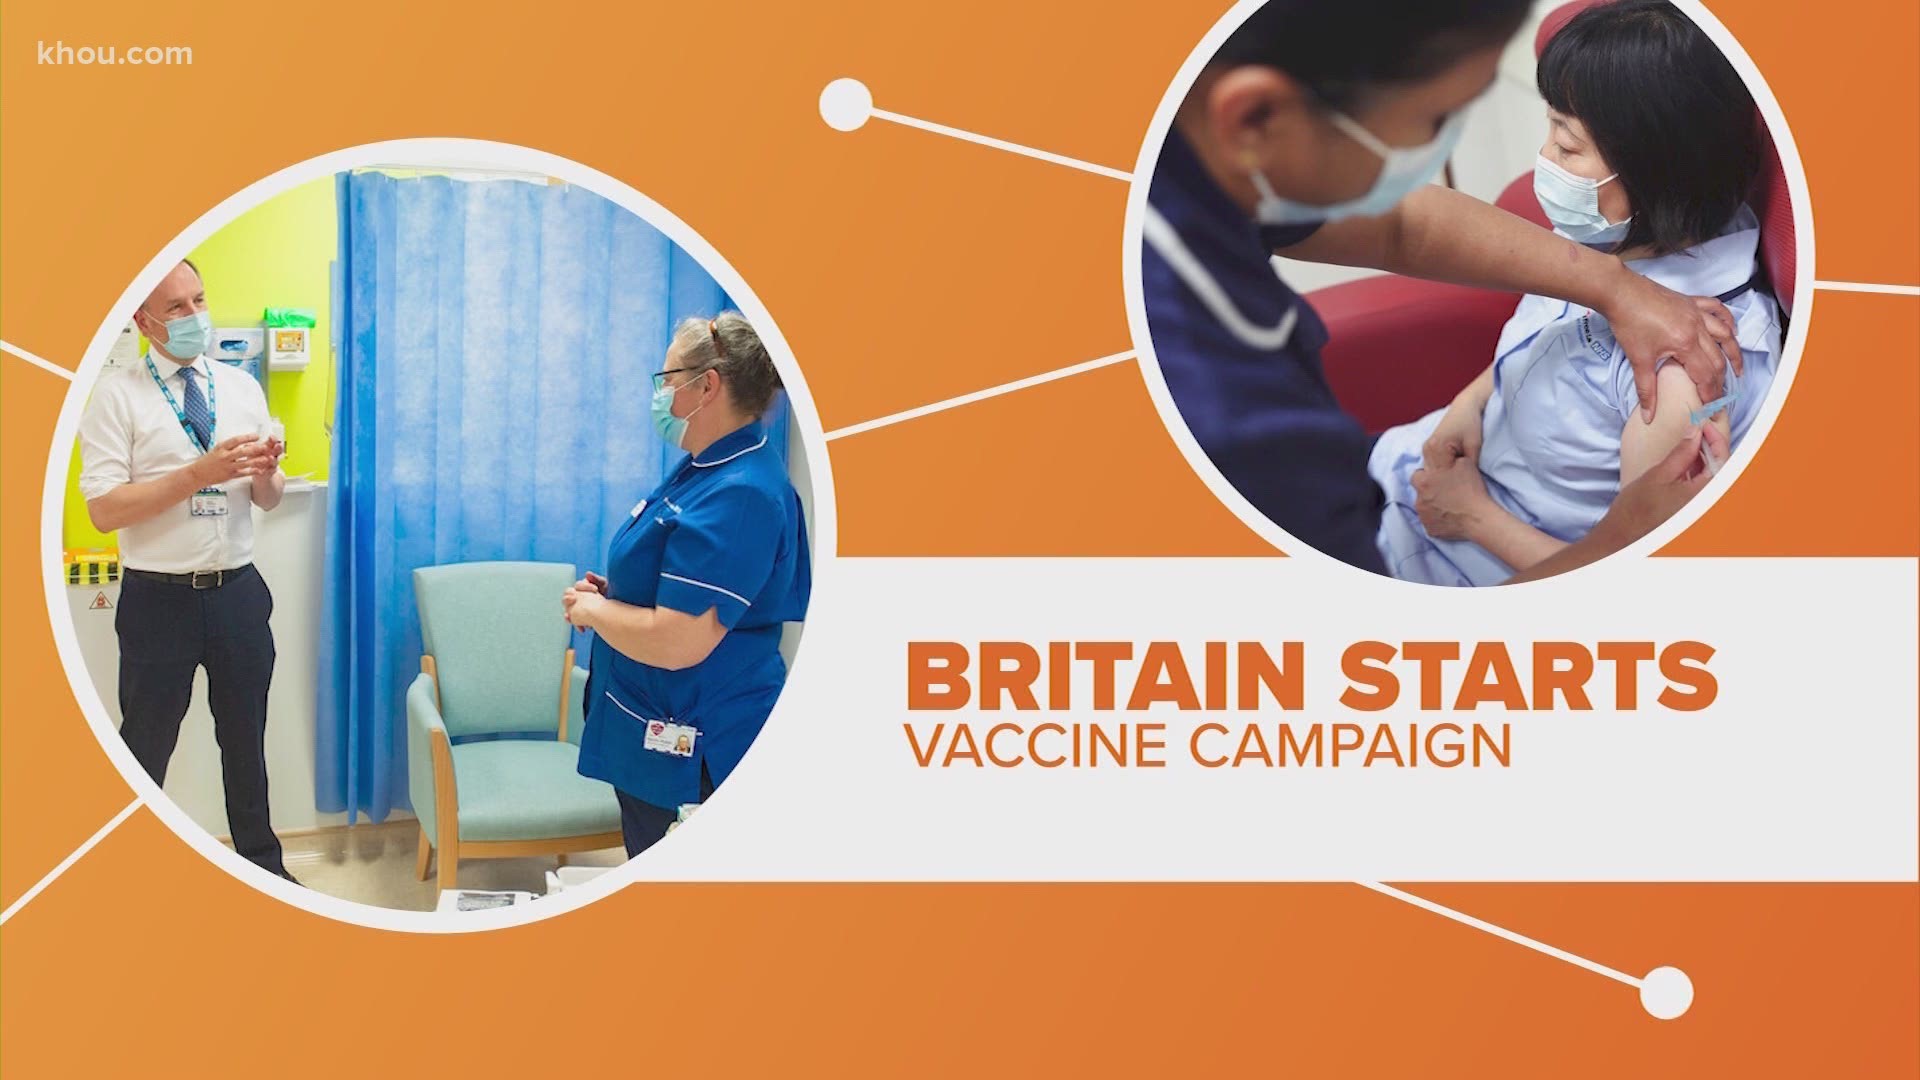 The United Kingdom is the first county to administer the Pfizer vaccine Tuesday, but what comes next? Let's Connect the Dots.